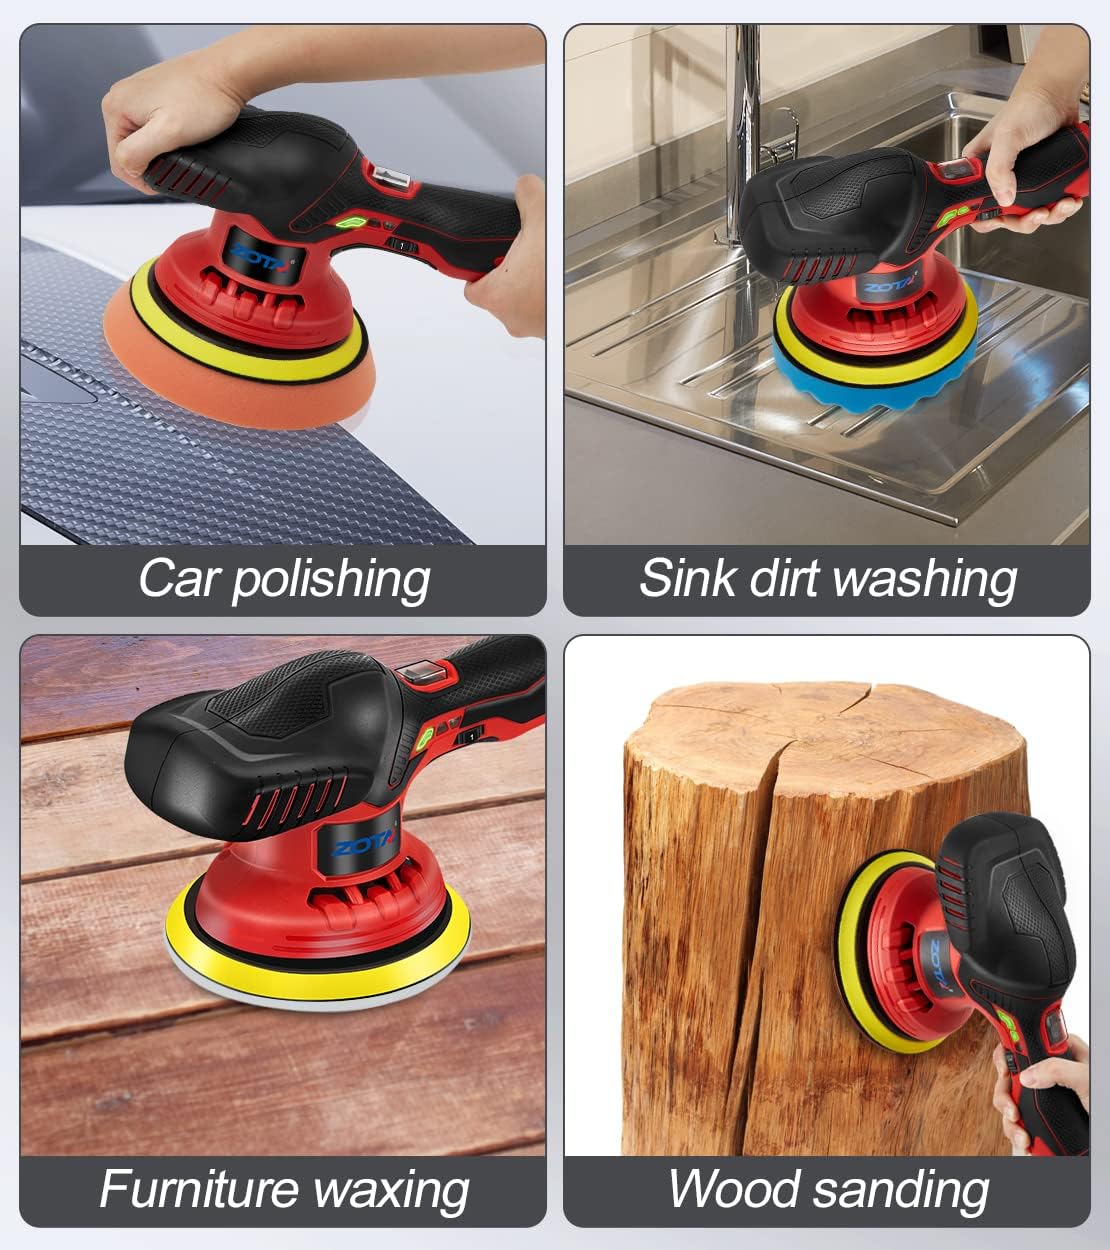 ZOTA Cordless Buffer Polisher for Car,6 inch 2pcs 12V/2.0Ah Lithium Rechargeable Battery Cordless Polisher with 6 Variable Speed,Quiet Orbital Car Buffers and Polishers kit.